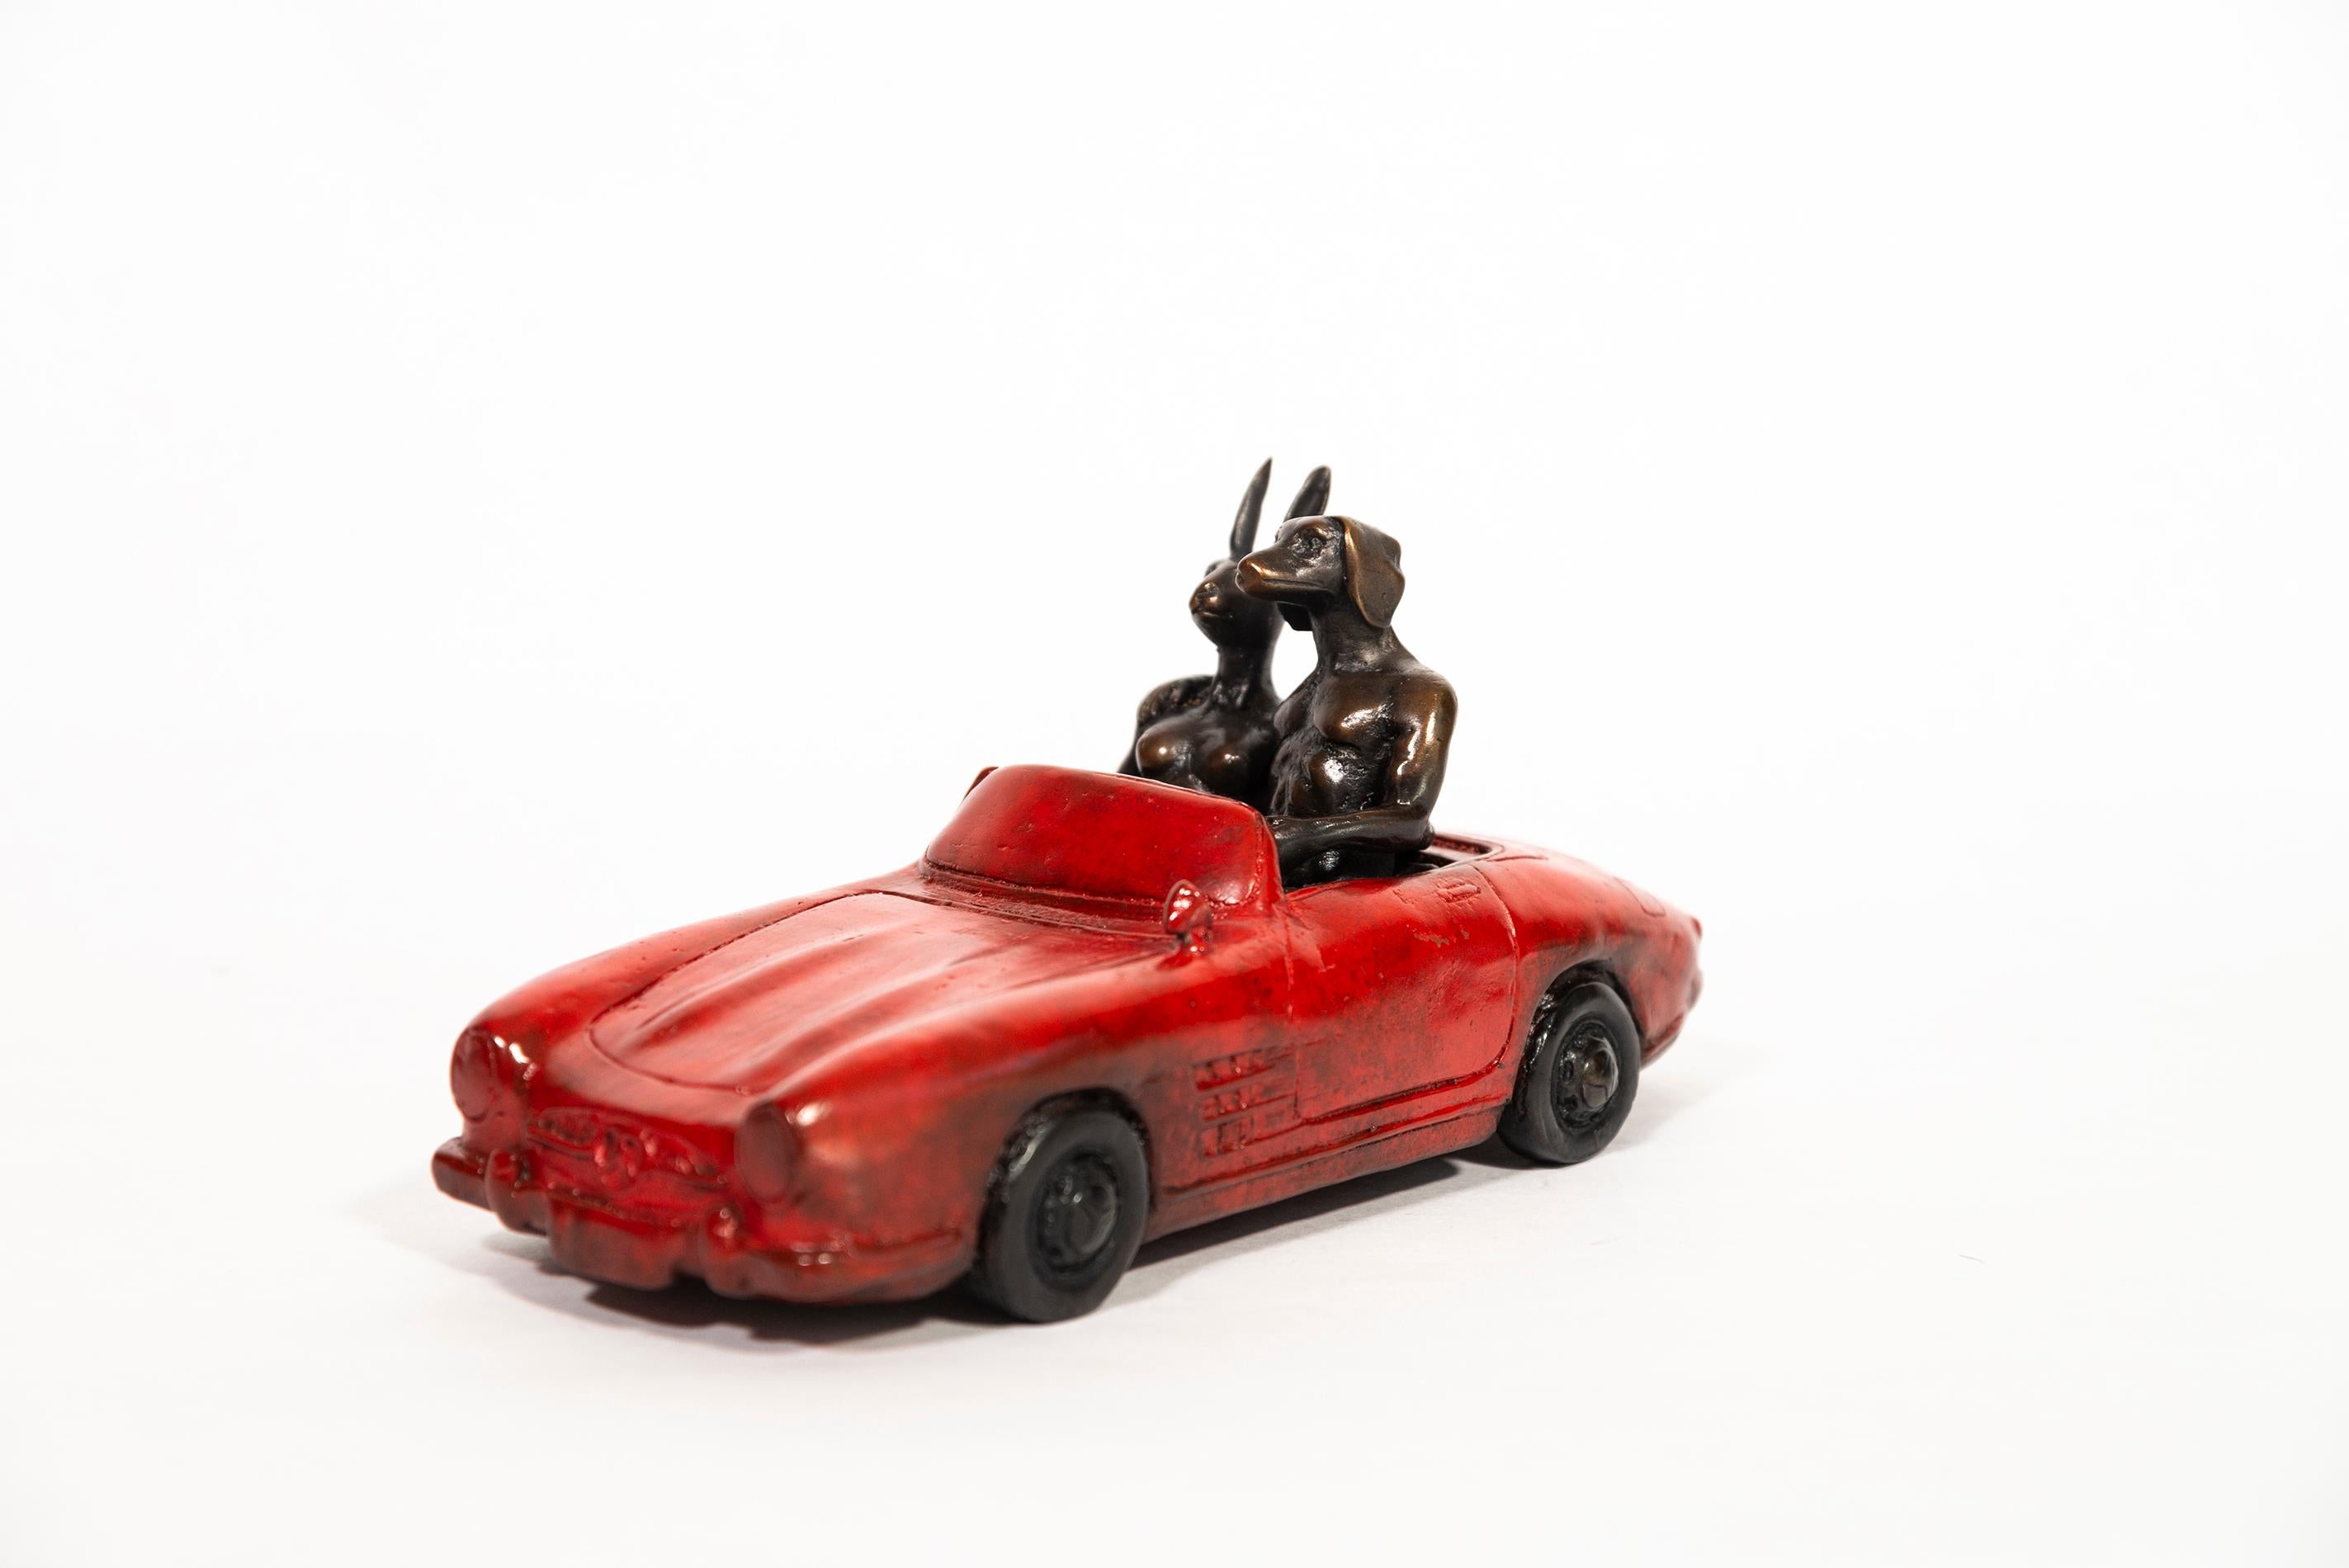 Gillie and Marc Schattner Figurative Sculpture - They loved breaking the speed limit 31/100 - figurative, bronze sculpture